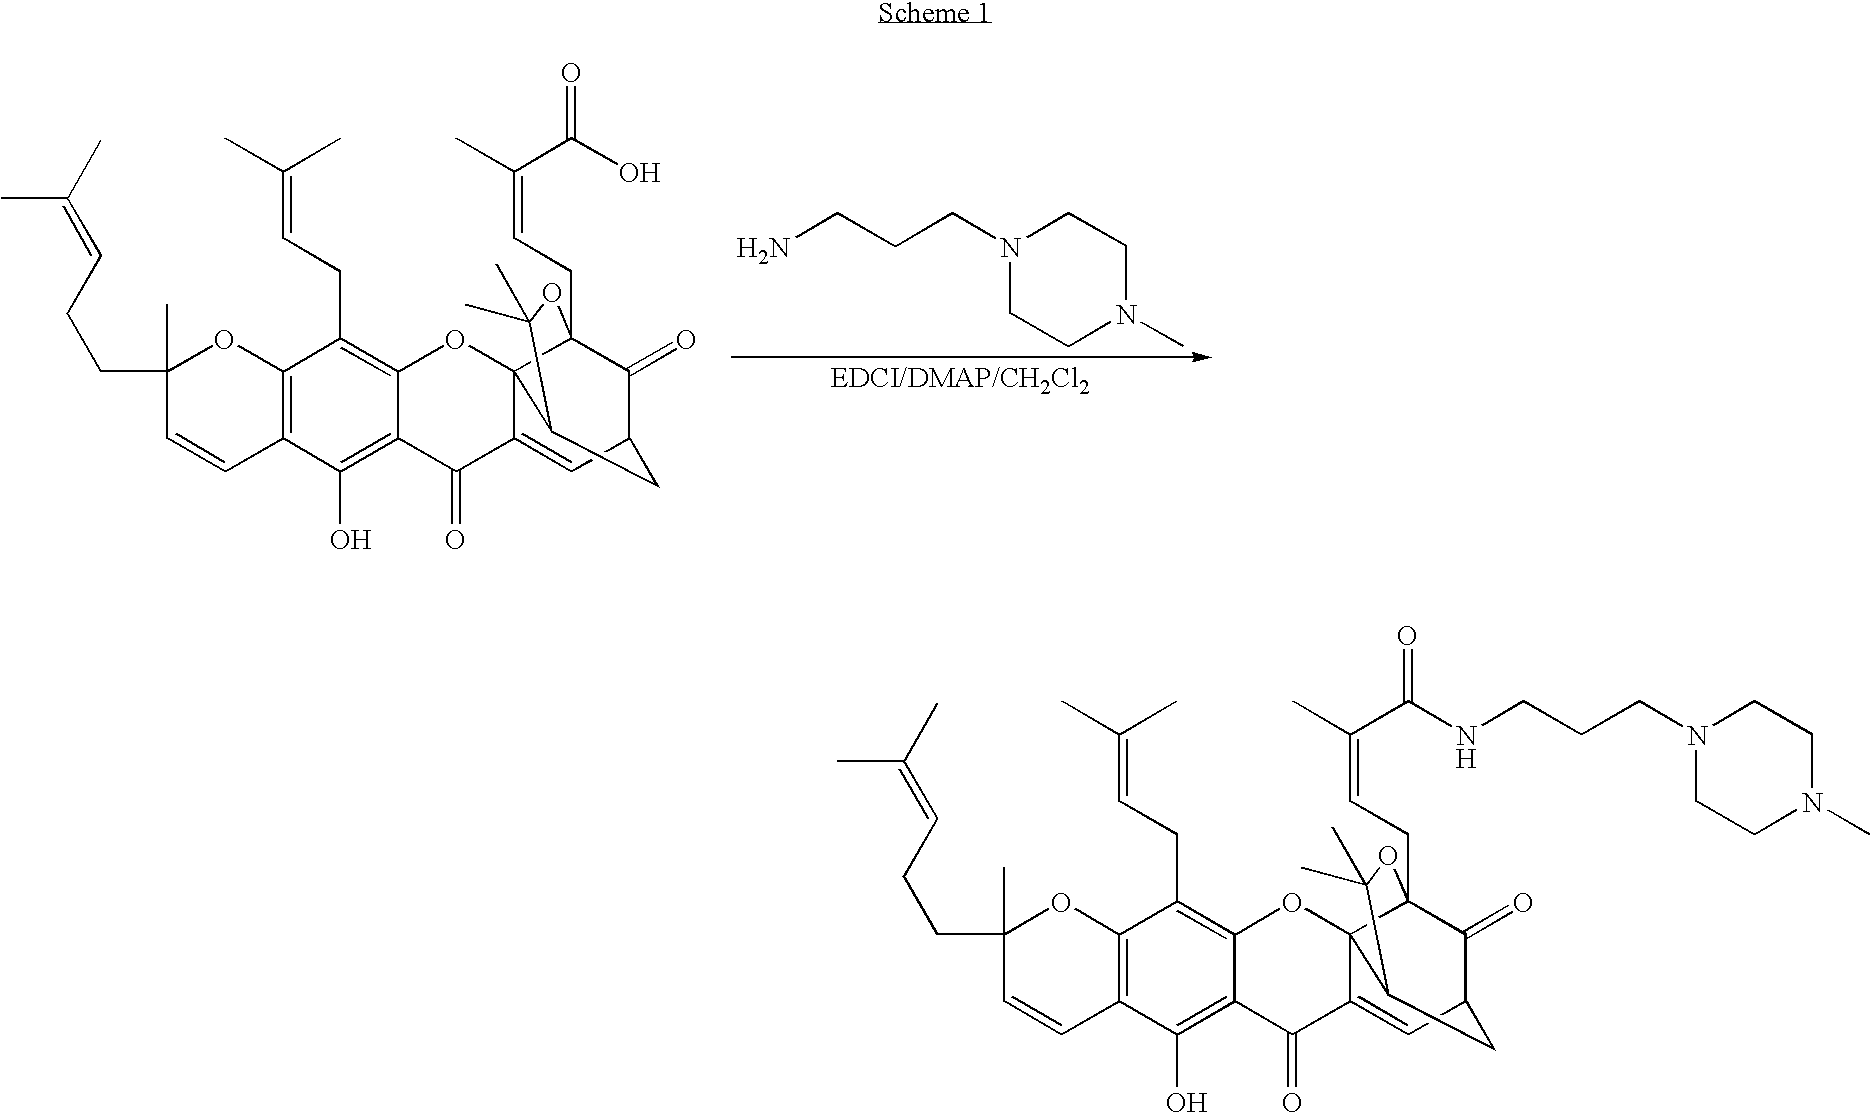 Derivatives of gambogic acid and analogs as activators of caspases and inducers of apoptosis